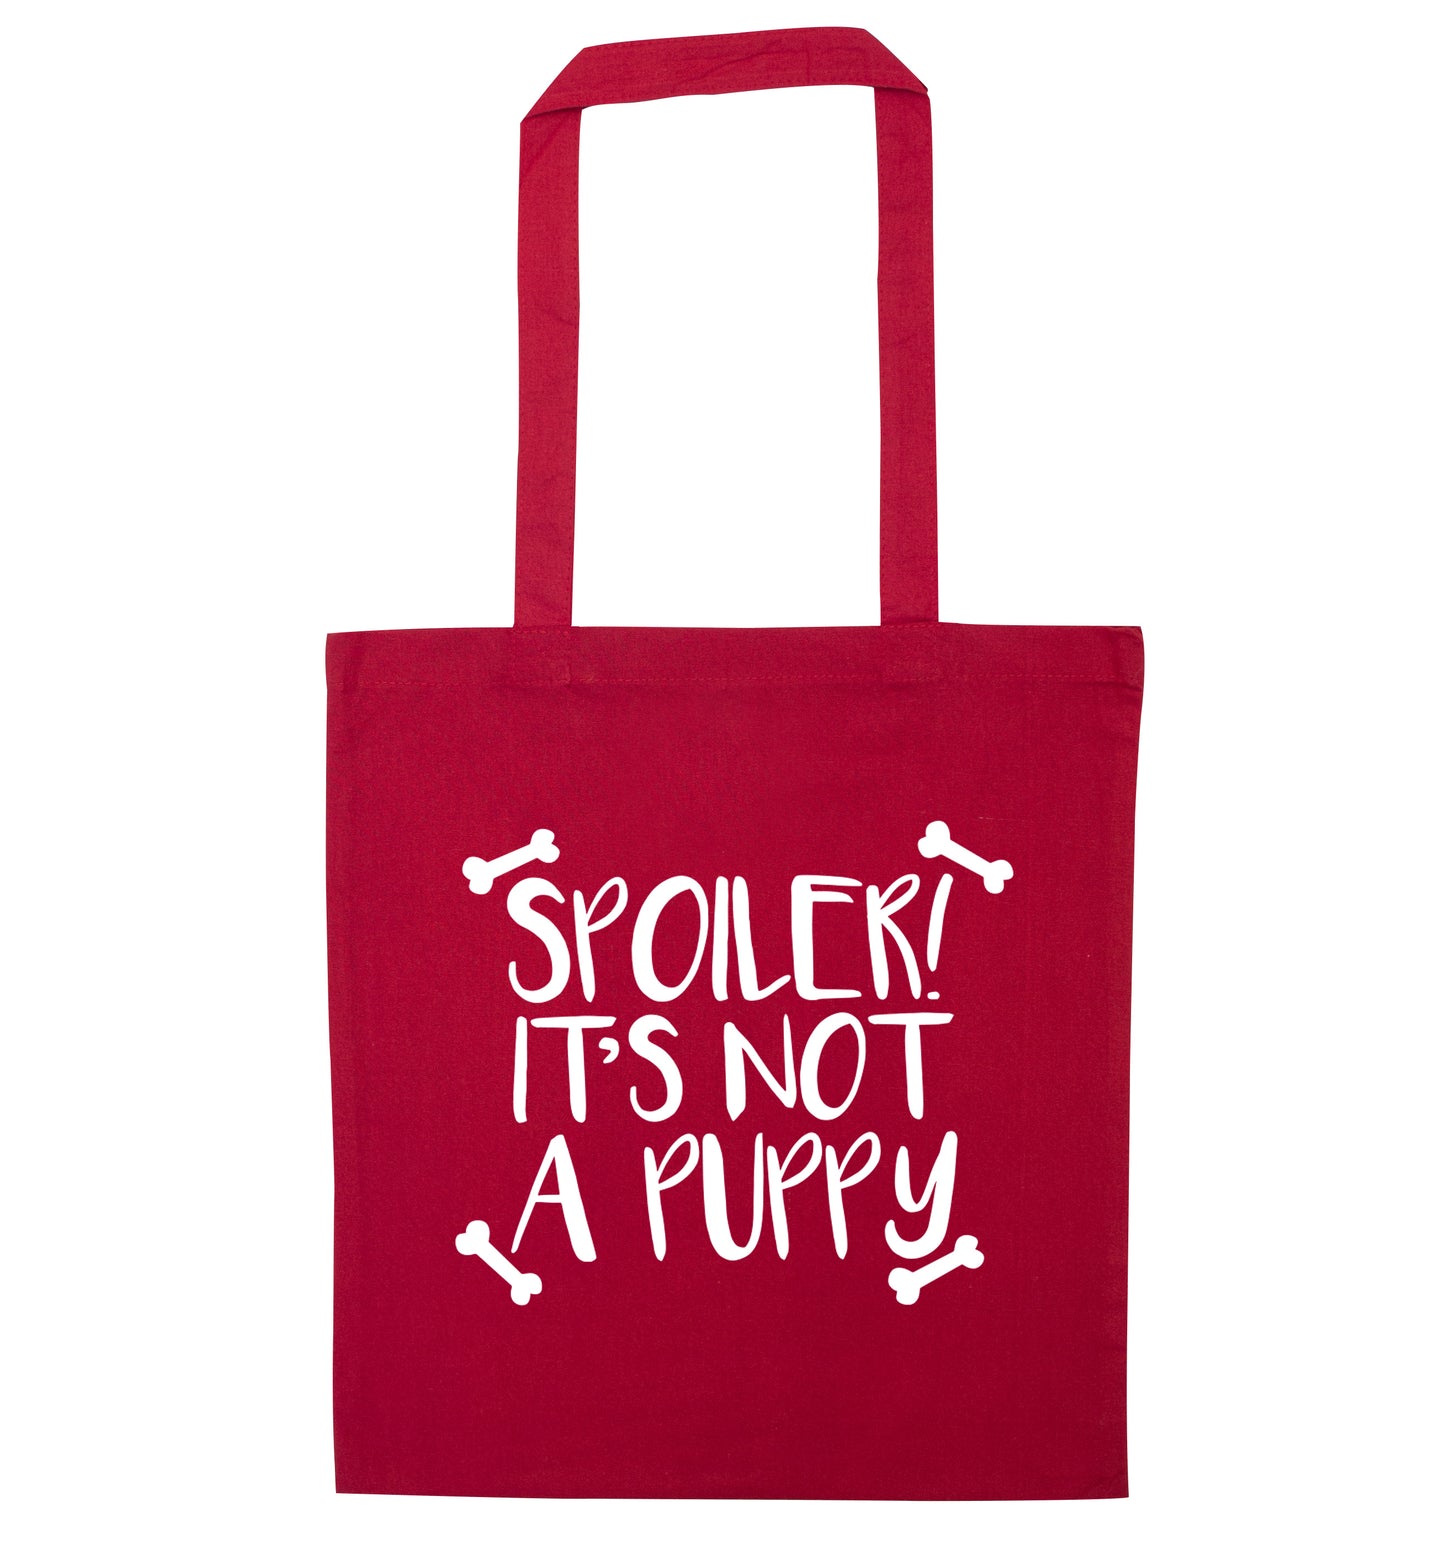 Spoiler it's not a puppy red tote bag